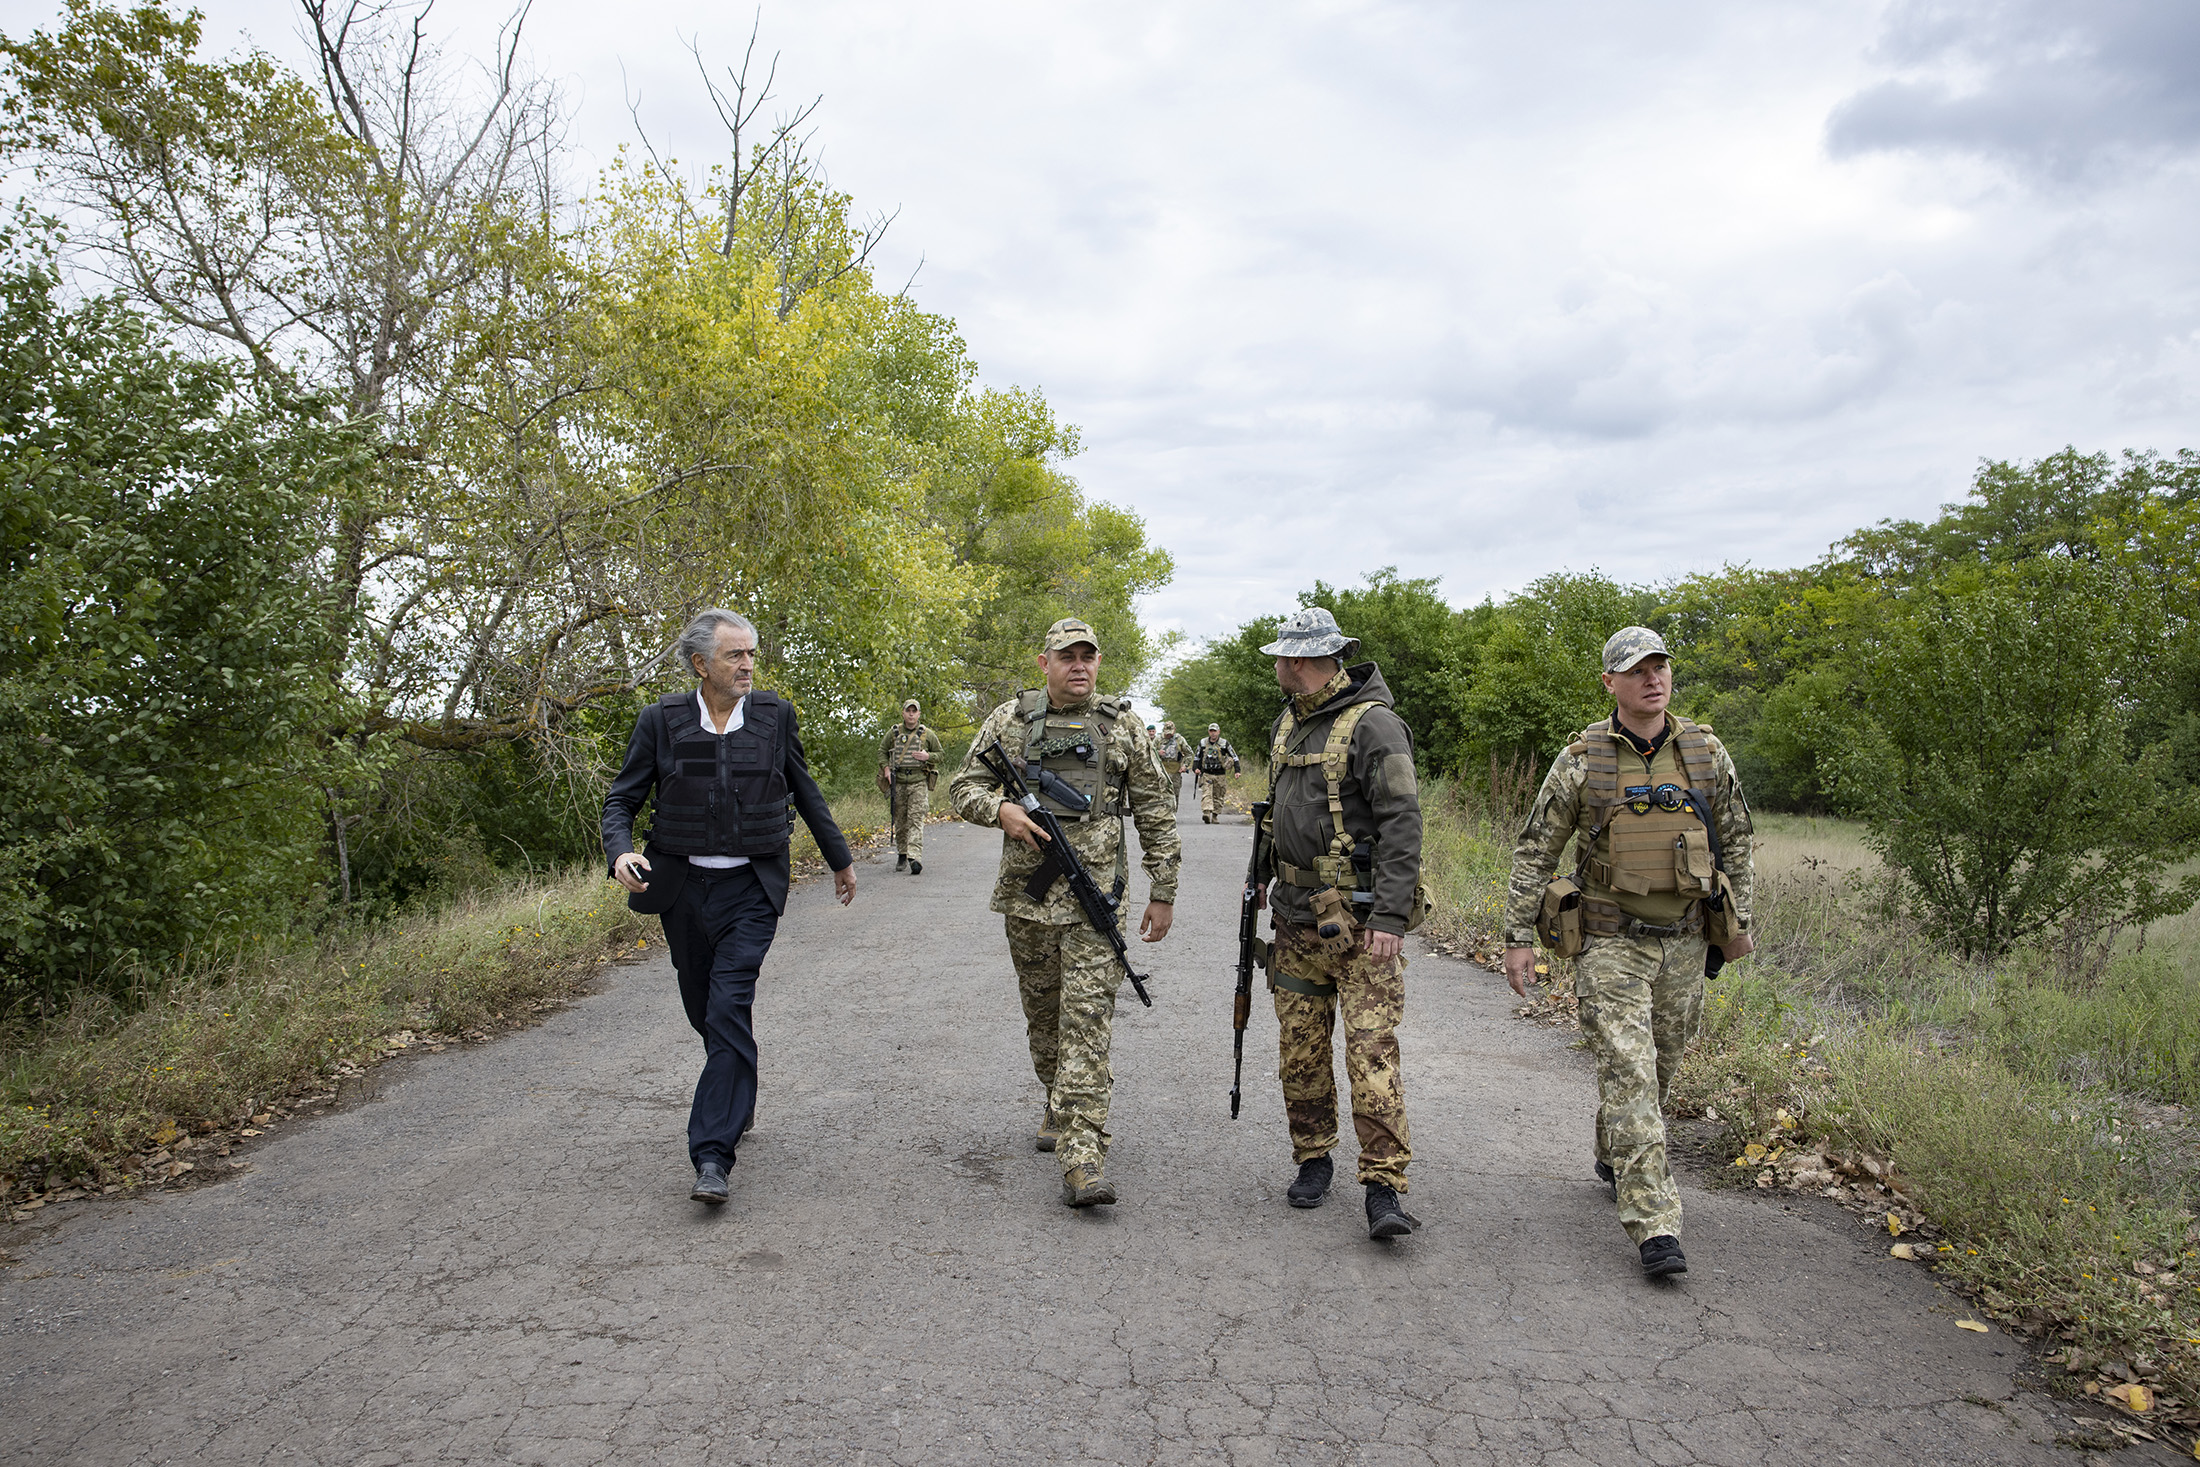 Bernard-Henri Lévy on the Kherson front with a special unit of sentries, the "border control".